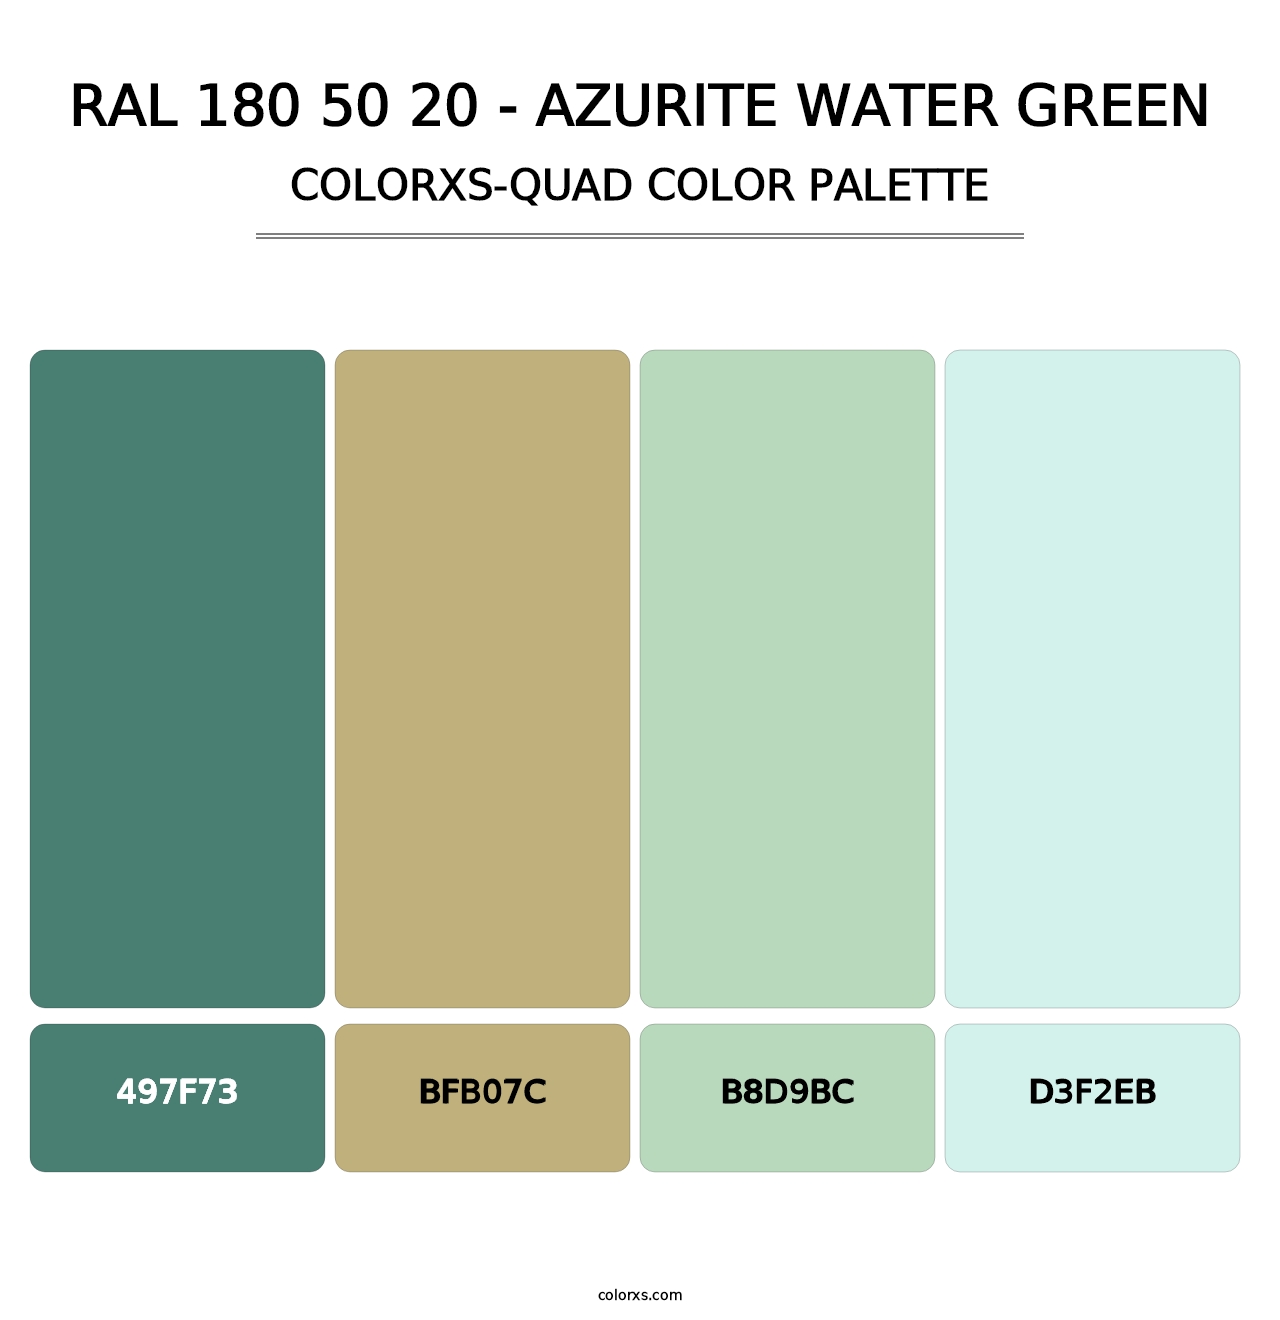 RAL 180 50 20 - Azurite Water Green - Colorxs Quad Palette